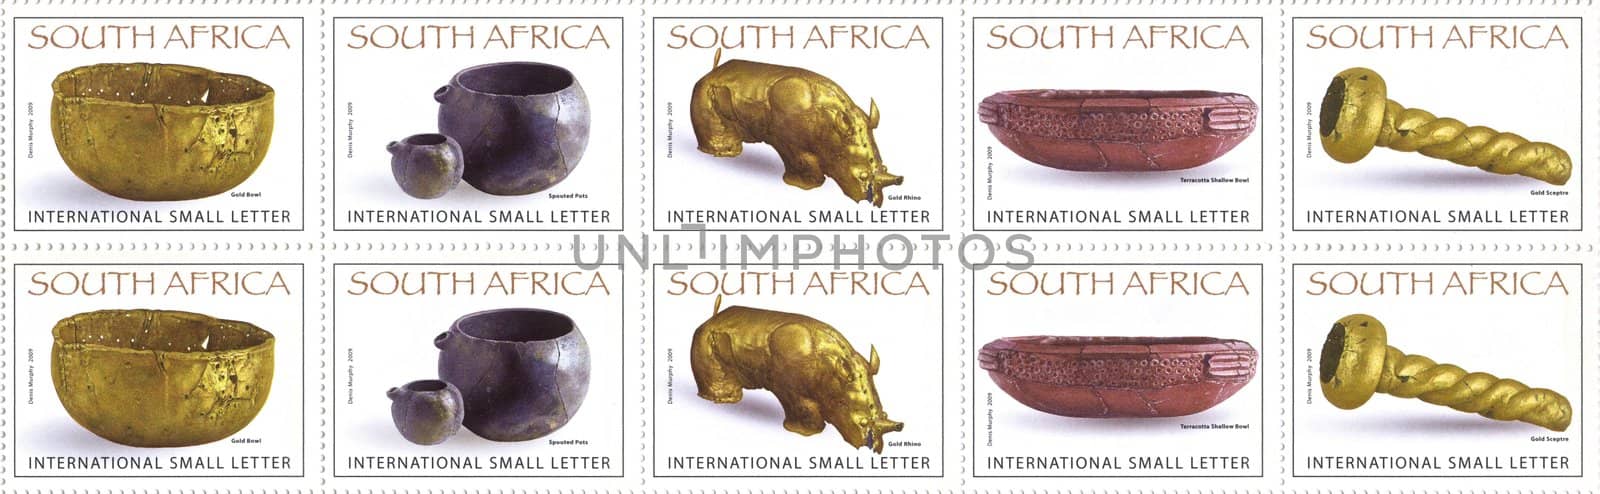 South Africa Stamps Collection